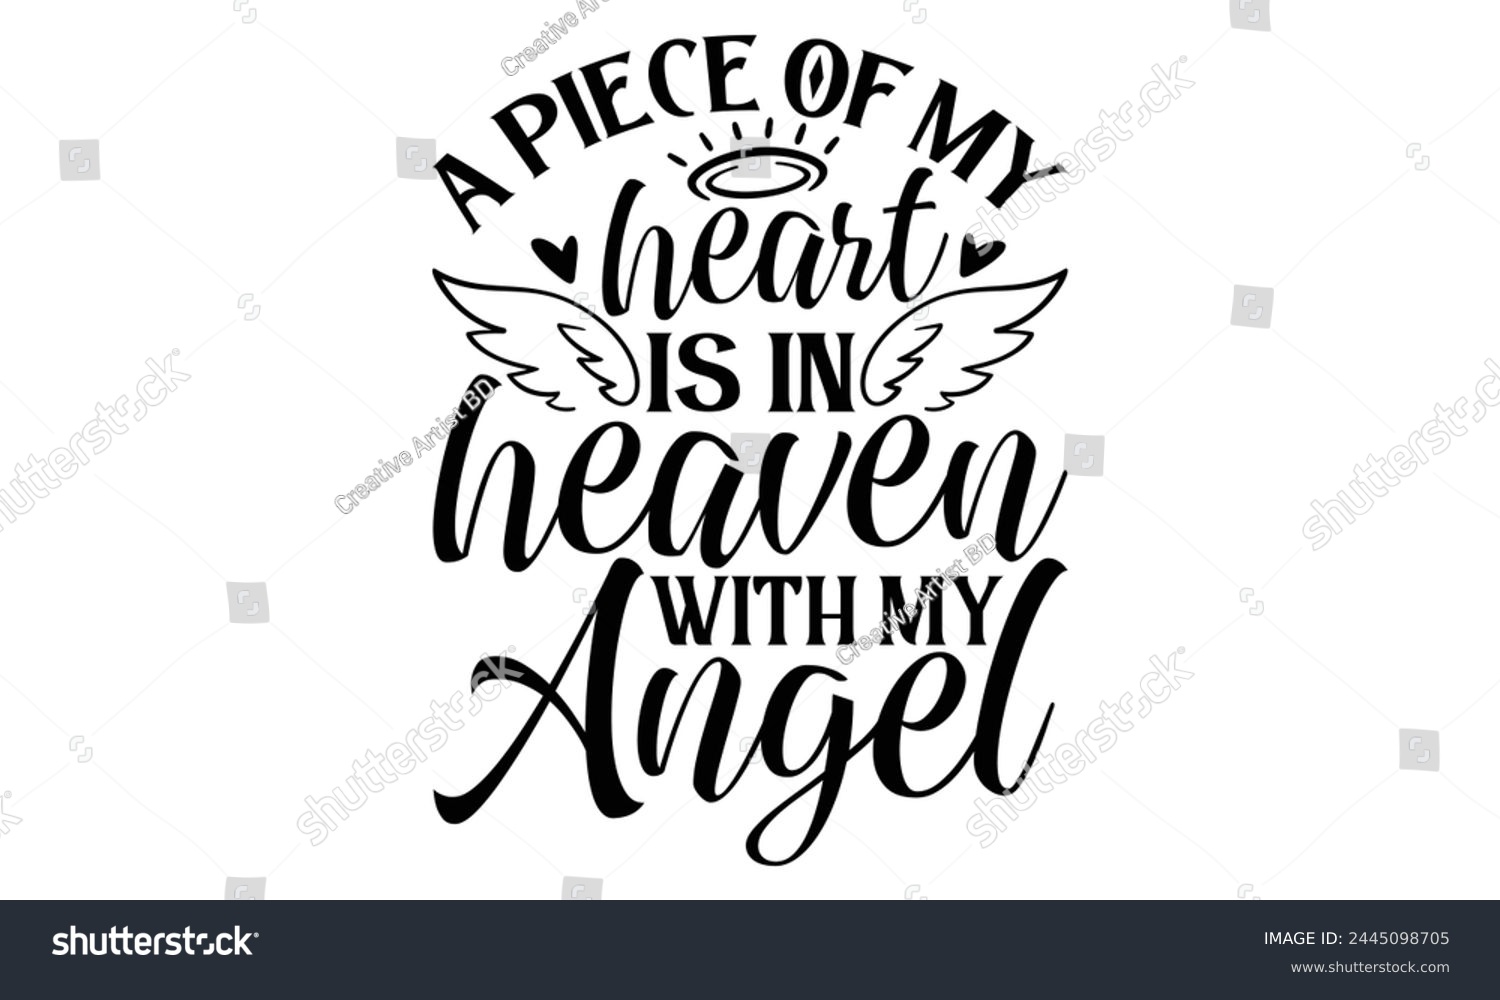 SVG of A Piece Of My Heart Is In Heaven With My Angel - Memorial T Shirt Design, Modern calligraphy, Cutting and Silhouette, for prints on bags, cups, card, posters. svg